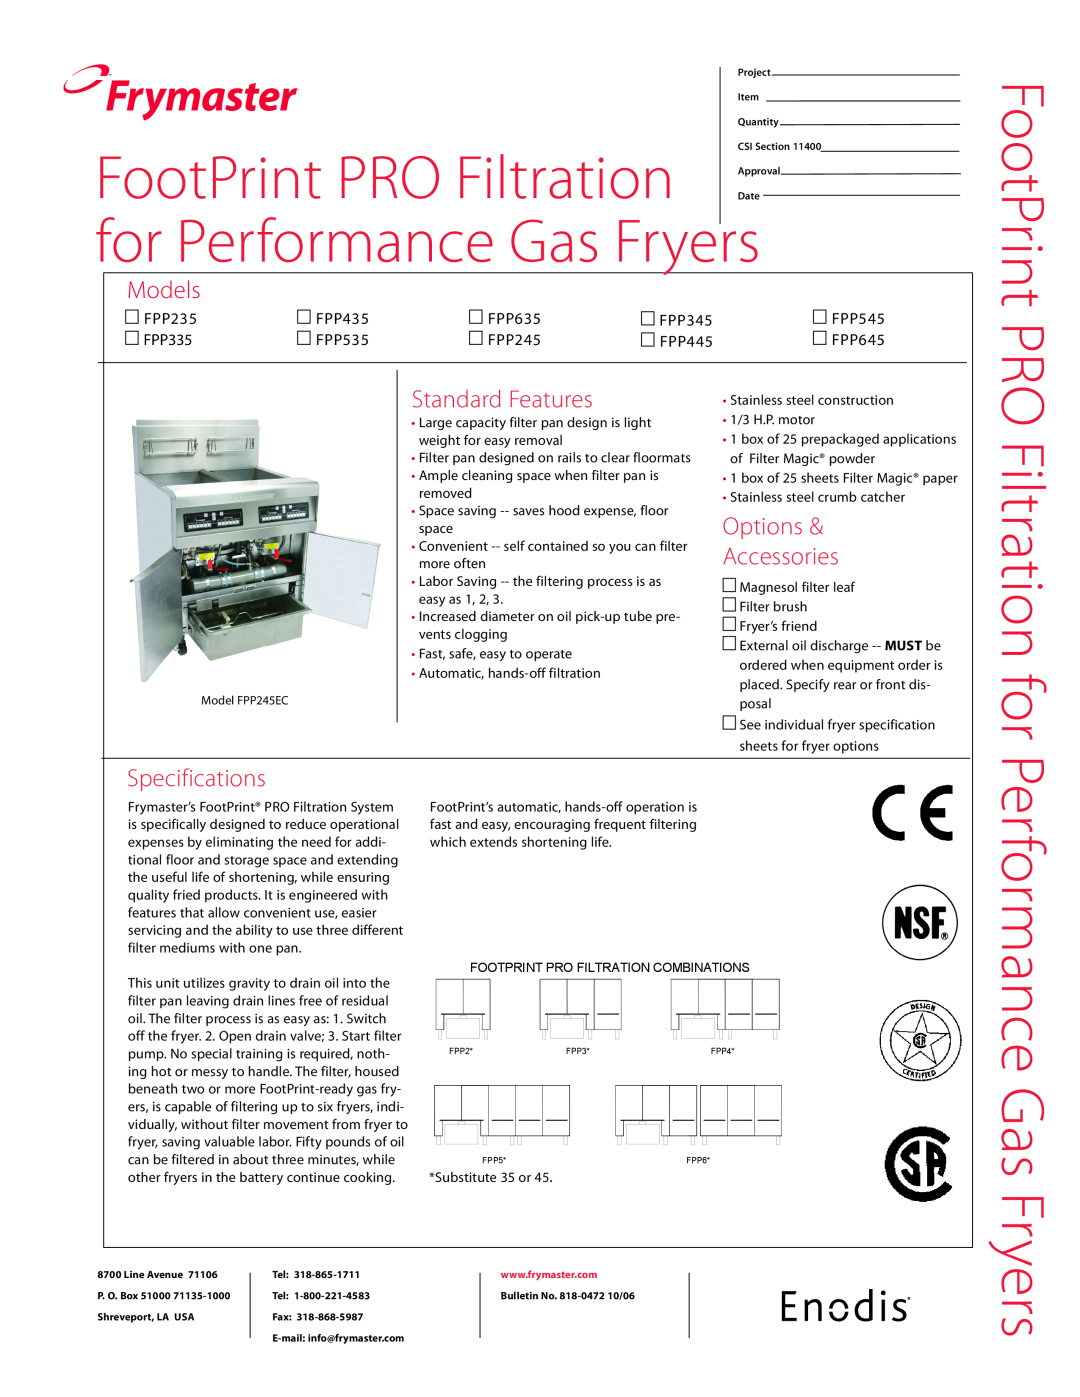 Frymaster FPP645 specifications for Performance Gas Fryers, FootPrint PRO Filtration, Frymaster, Models, Standard Features 